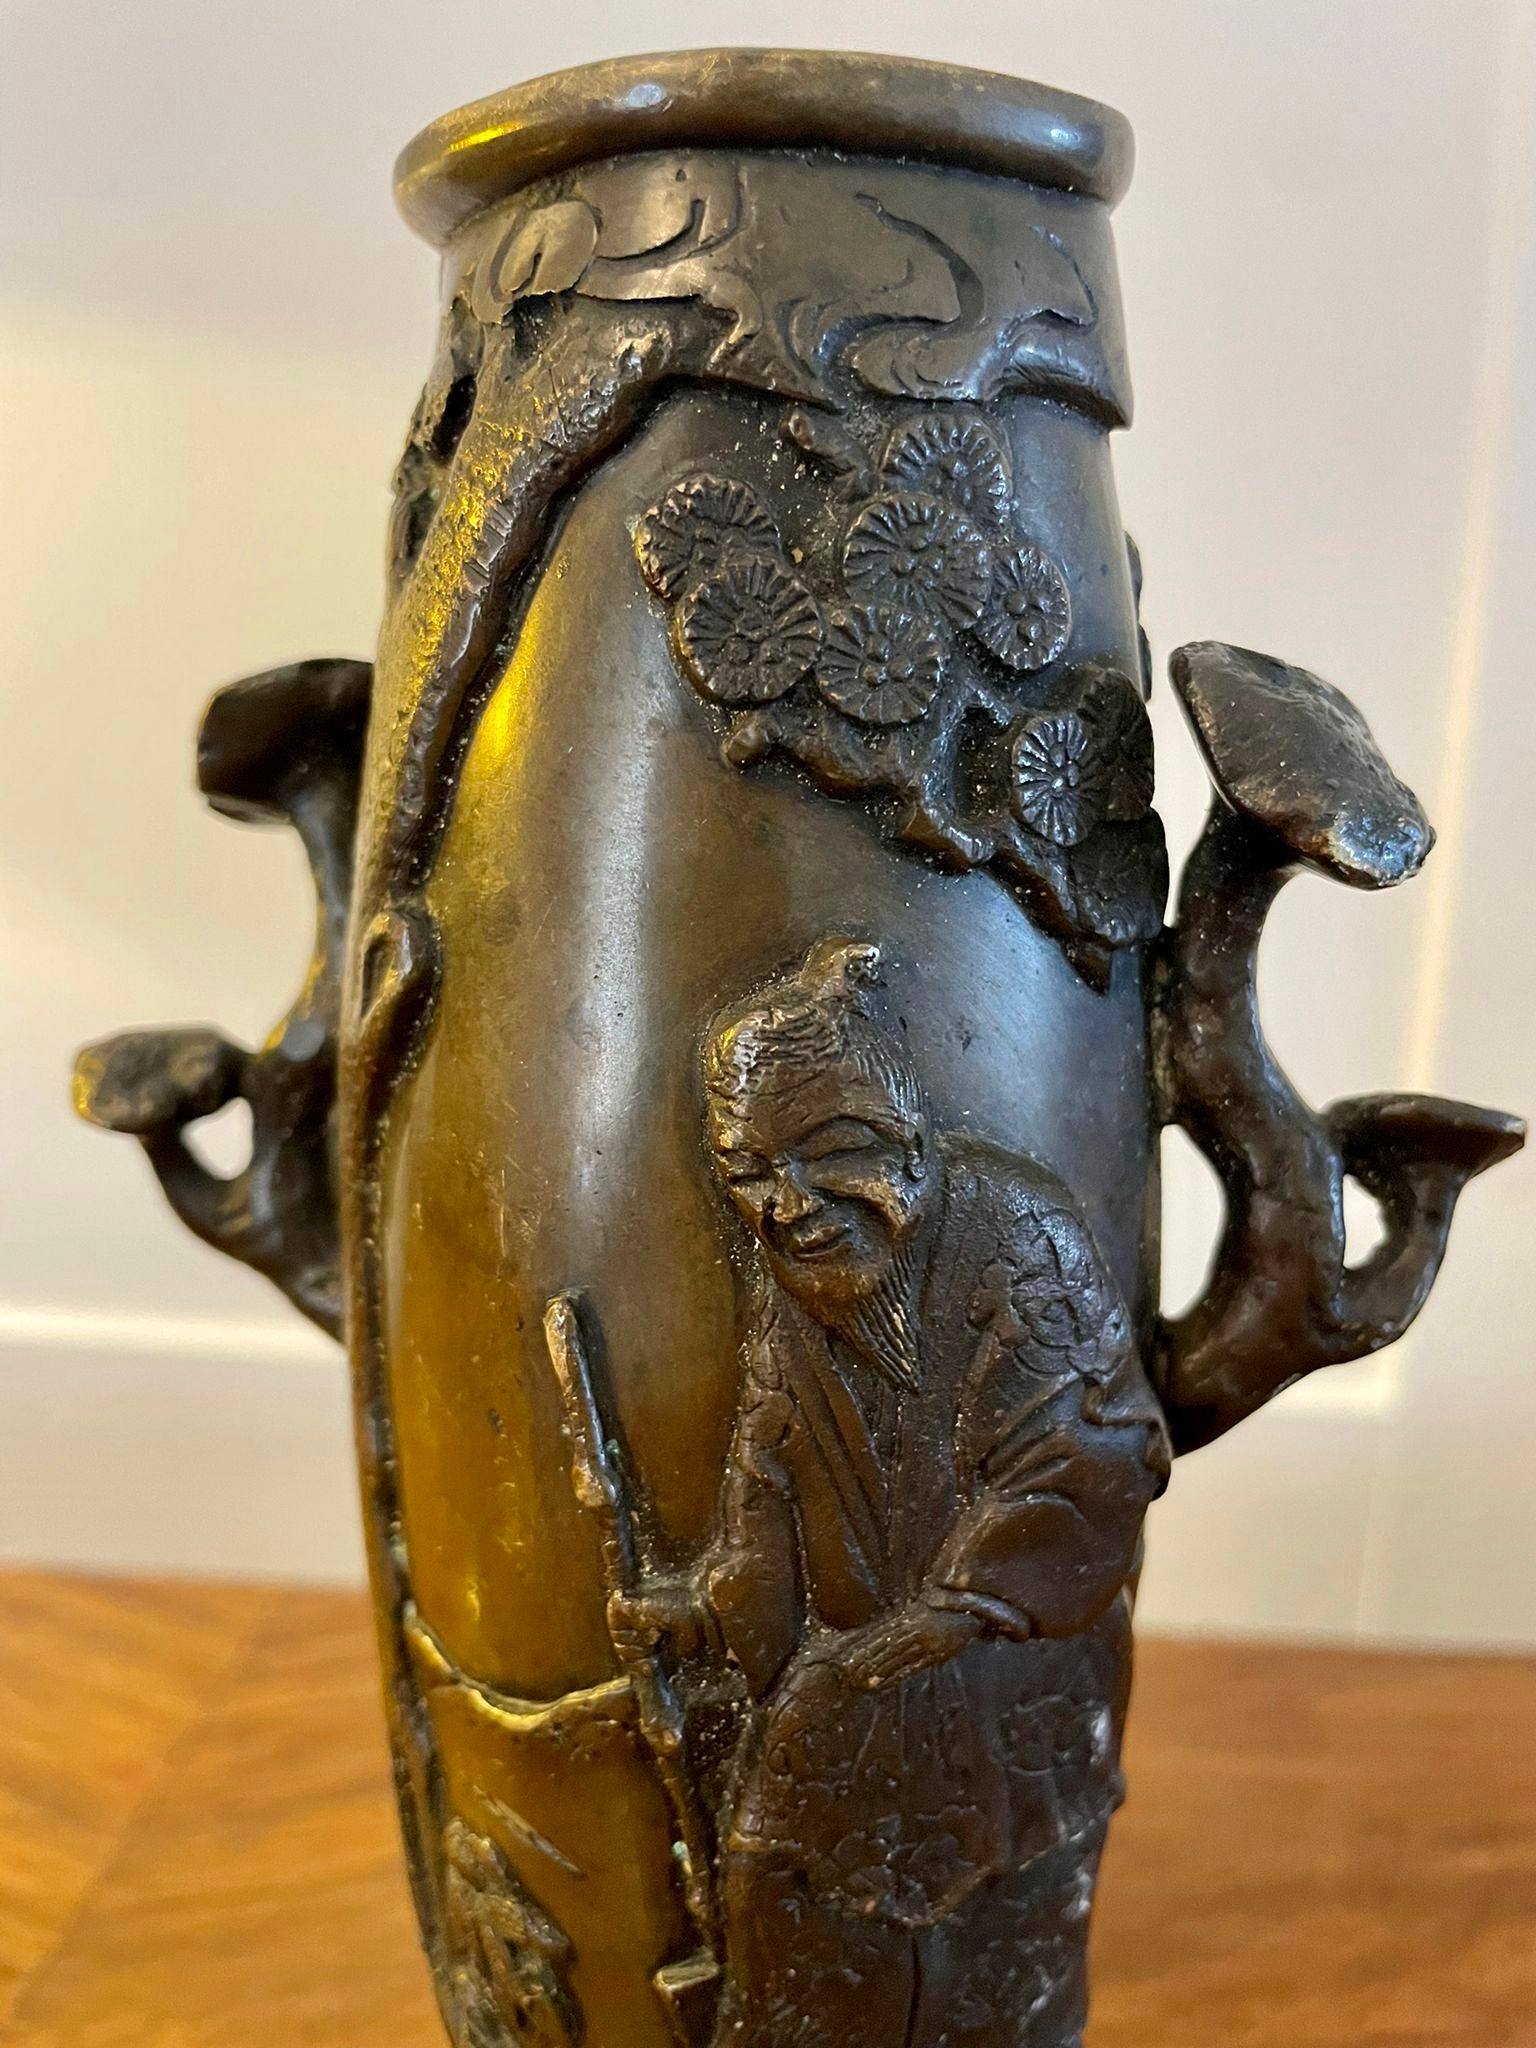 Quality antique Chinese bronze vase having a quality ornate Chinese decorated bronze vase featuring a blossom tree, oriental male figure and an oriental female stood with crane

Measures: H 18 x W 10 x D 6cm
Date 1880.
  